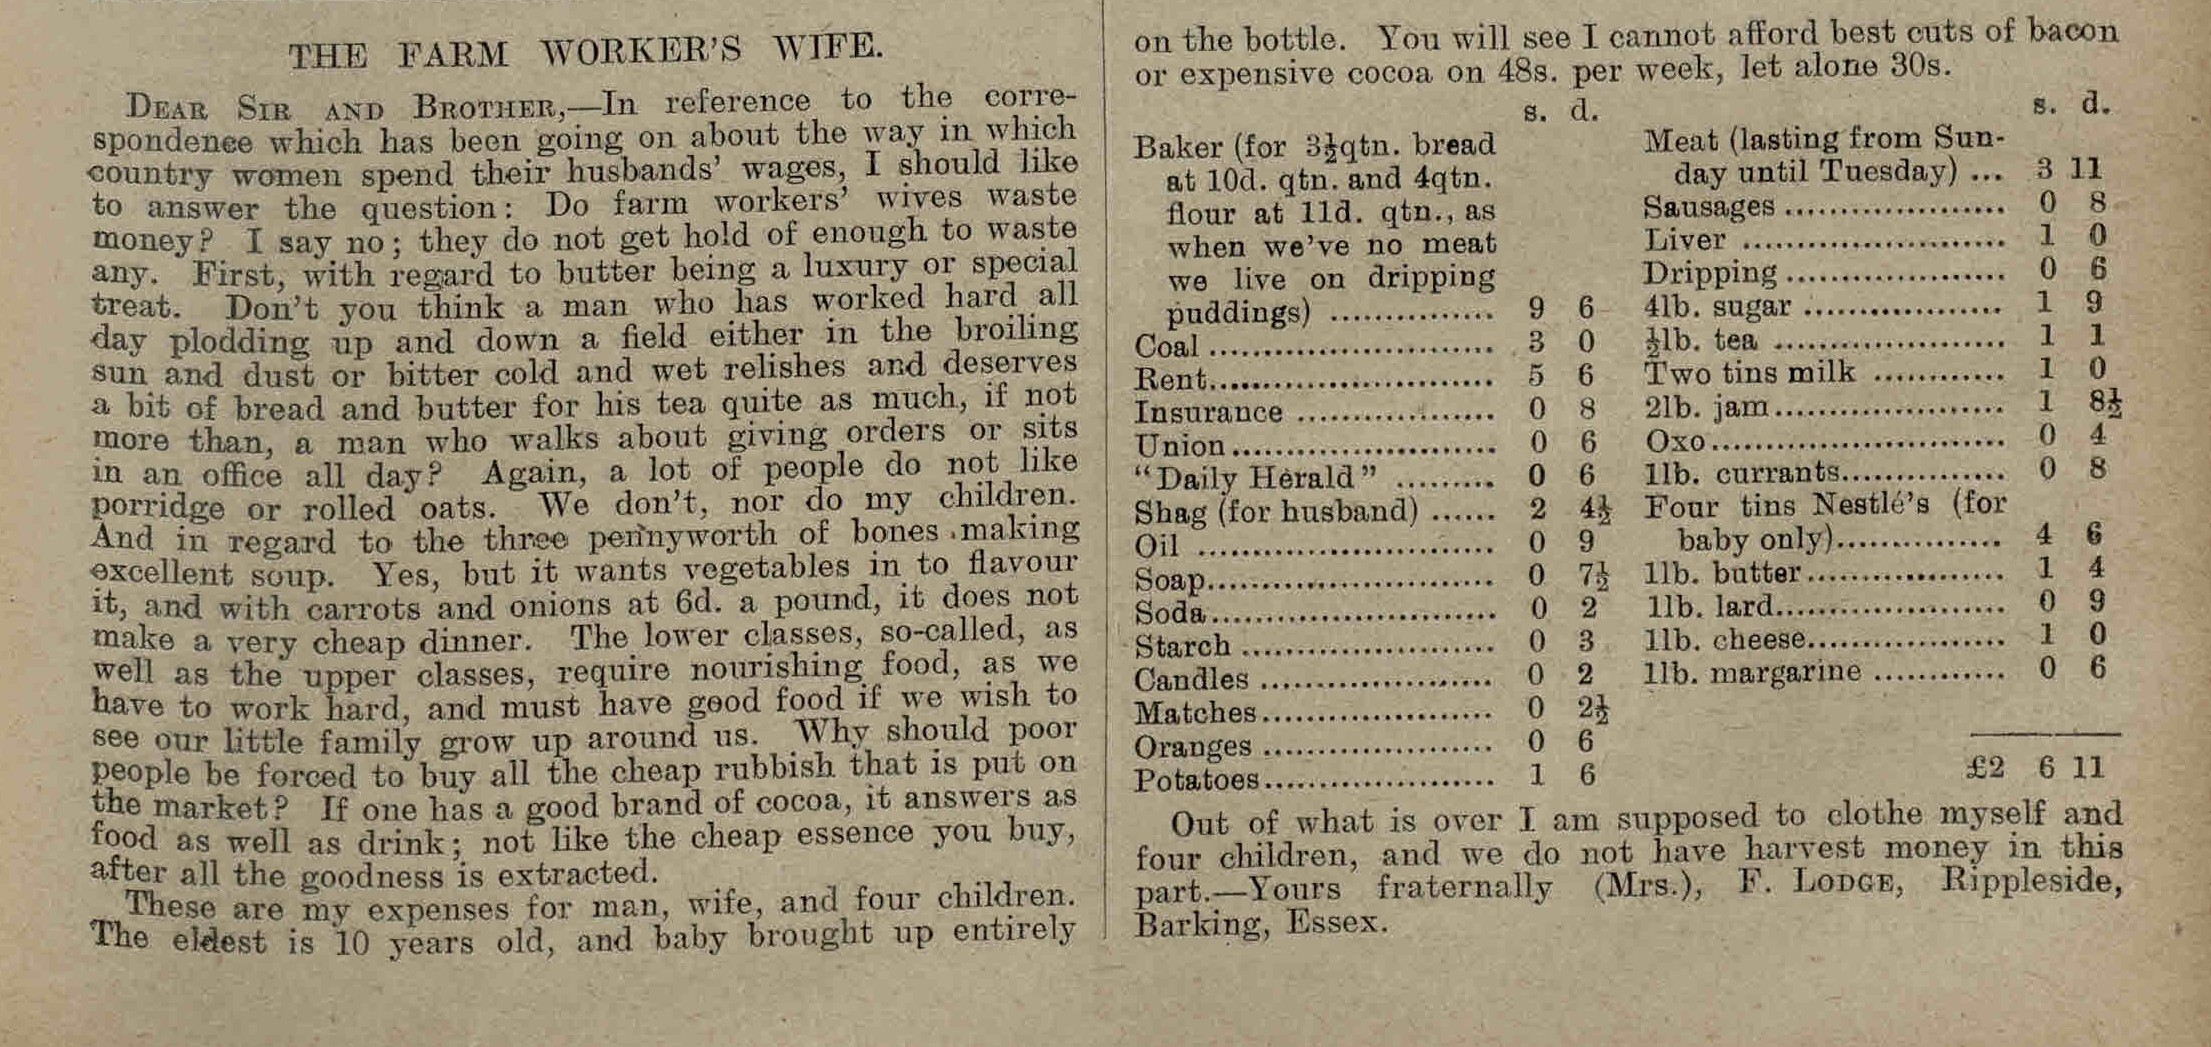 Extract from The Land Worker, May 1922, reproducing a letter from Mrs F. Lodge, Rippleside, Barking, Essex, in which she outlines the weekly expenditure for her, her husband and their four children